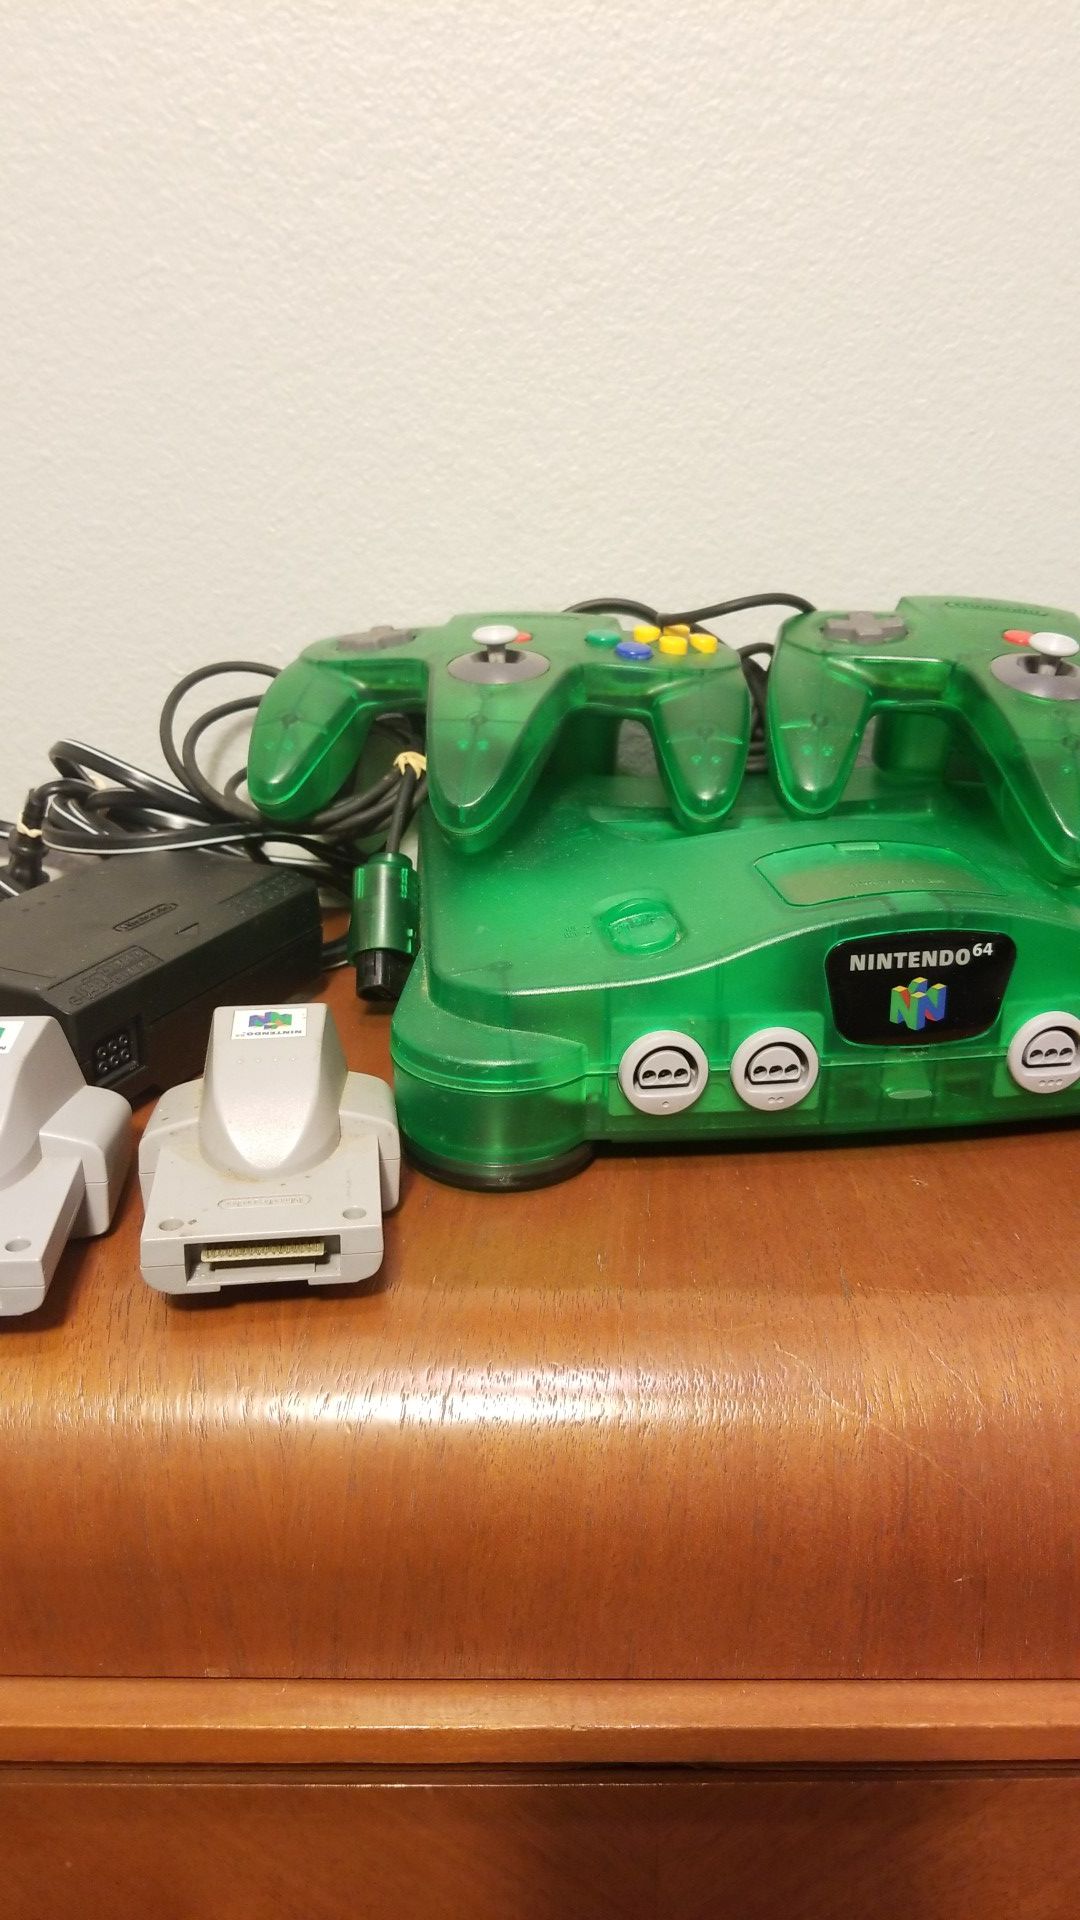 Nintendo 64 Jungle Green Console with 2 Original Controllers 2 Rumble Packs